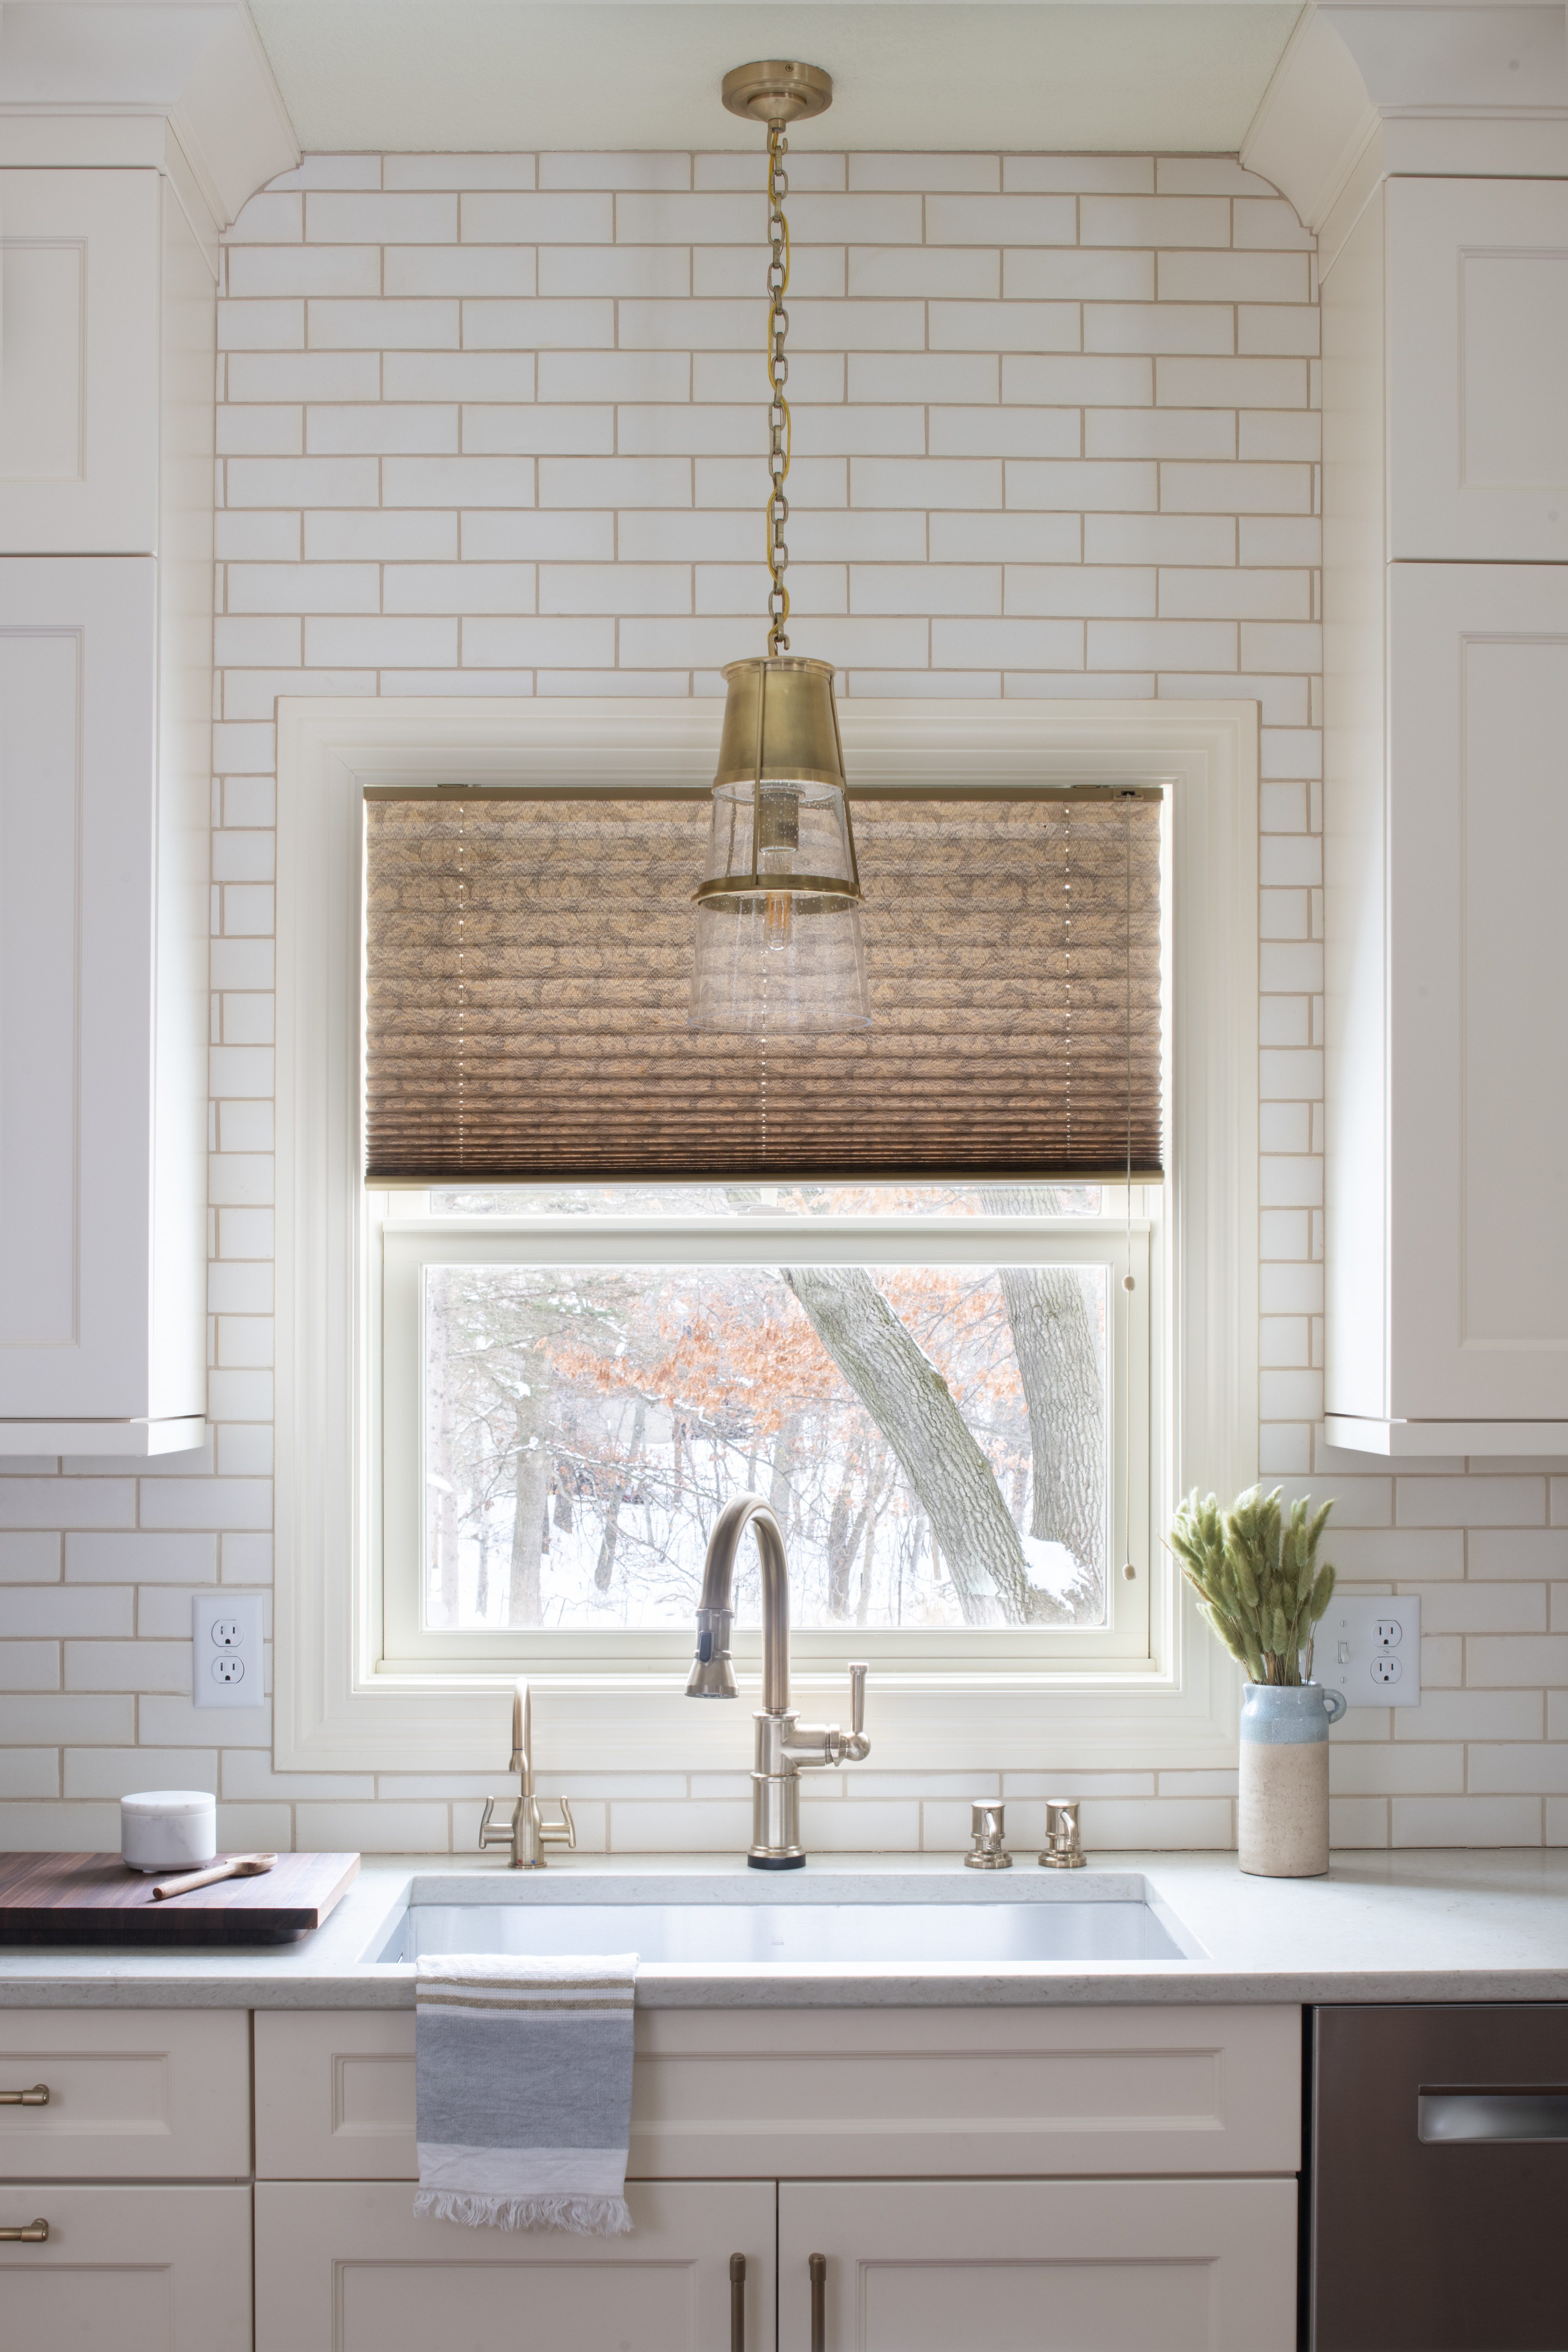 Warm Kitchen Wall Tile and Sink Natural Lighting